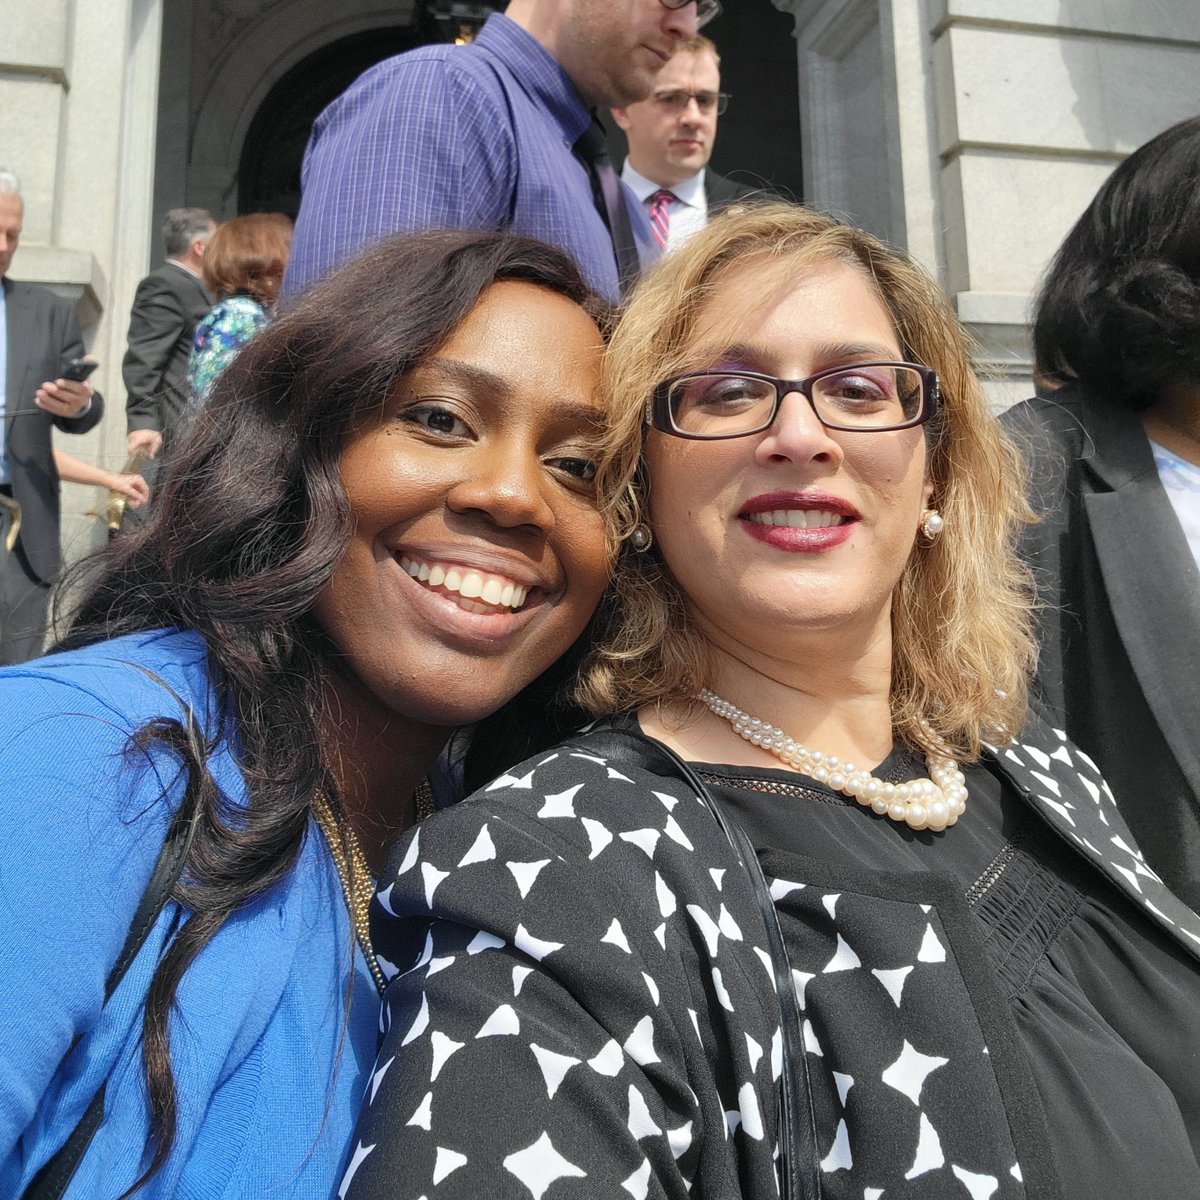 Delco & Bucks County were in the house at PPA #Legislative Day! @springfieldRXpa owner Dr. Chichi Ilonzo Momah and @PAPharmacists Board member @DrSeemaKazmi advocating in Harrisburg for #PBMReform and to #SaveCommunityPharmacies!
Cc: @WhiteHouse, @pharmacists, @commpharmacy